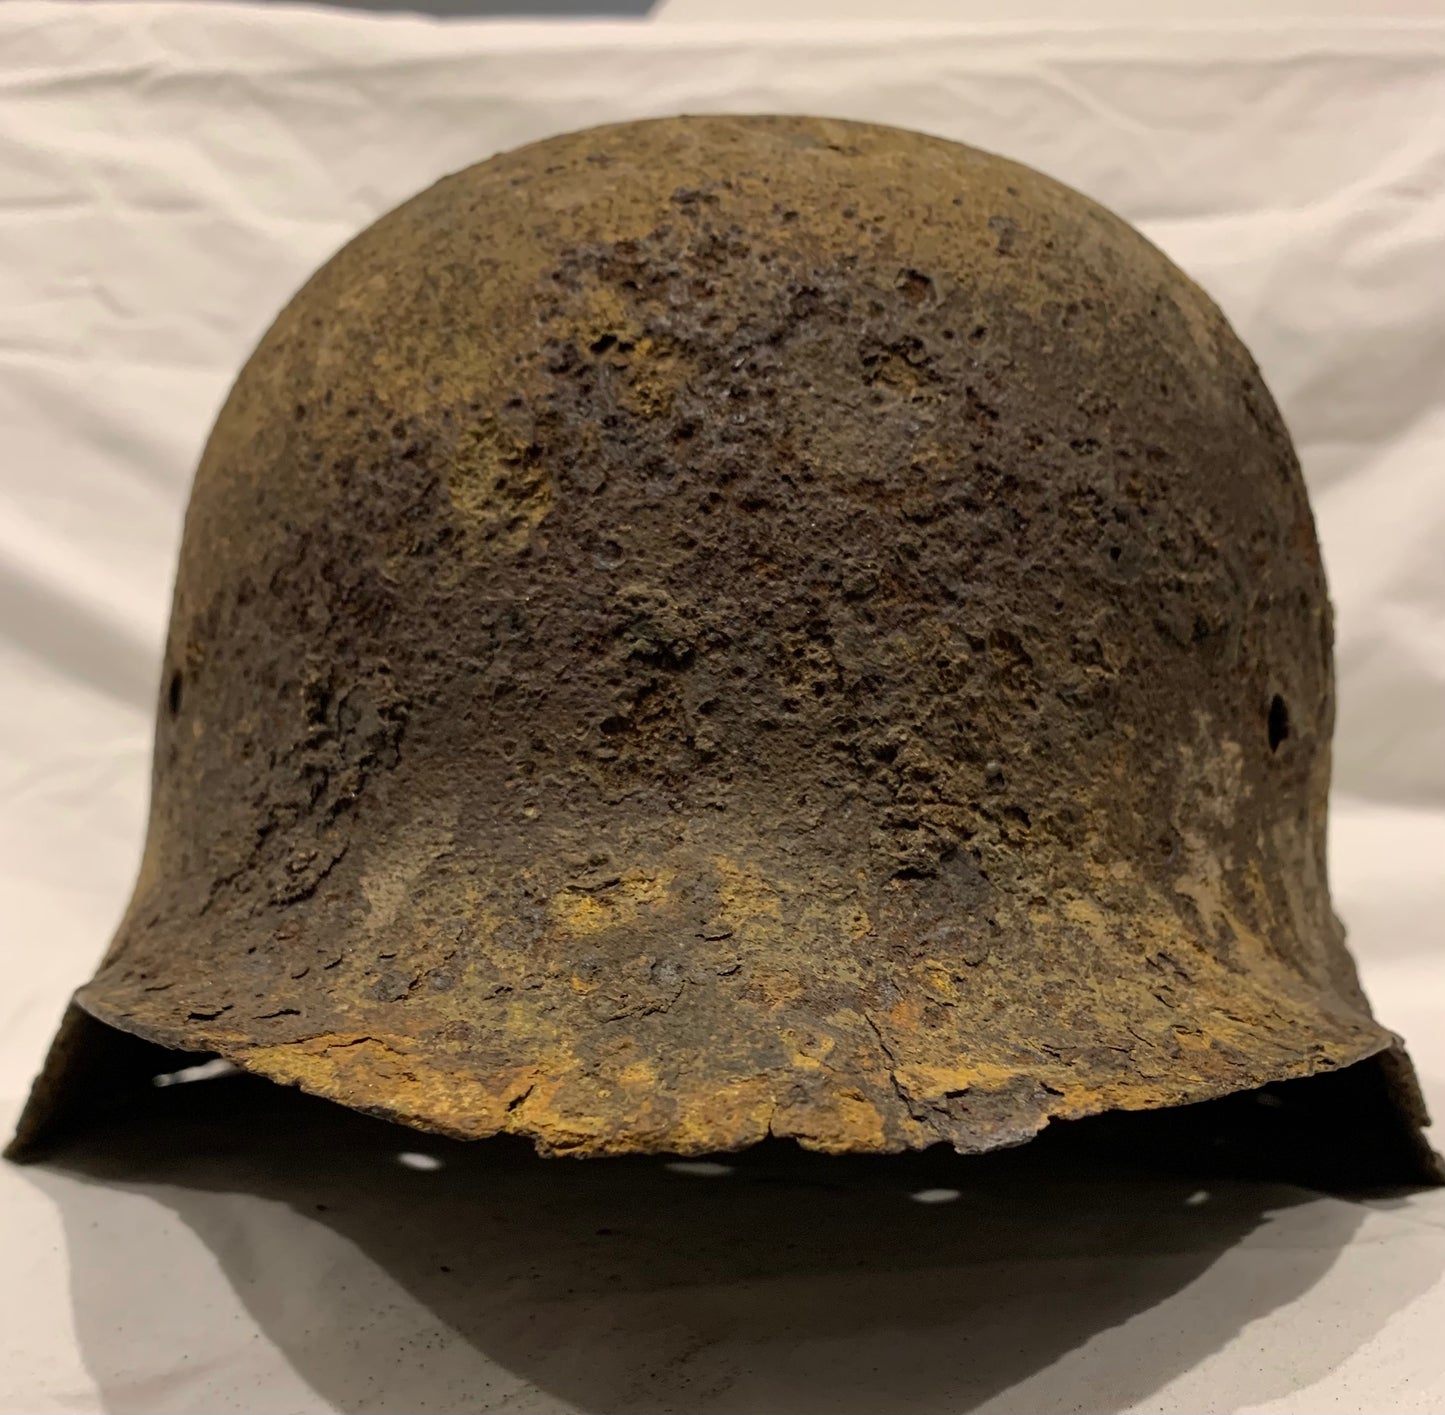 WW2 German M42 Winter Camouflage Helmet from the Eastern Front.